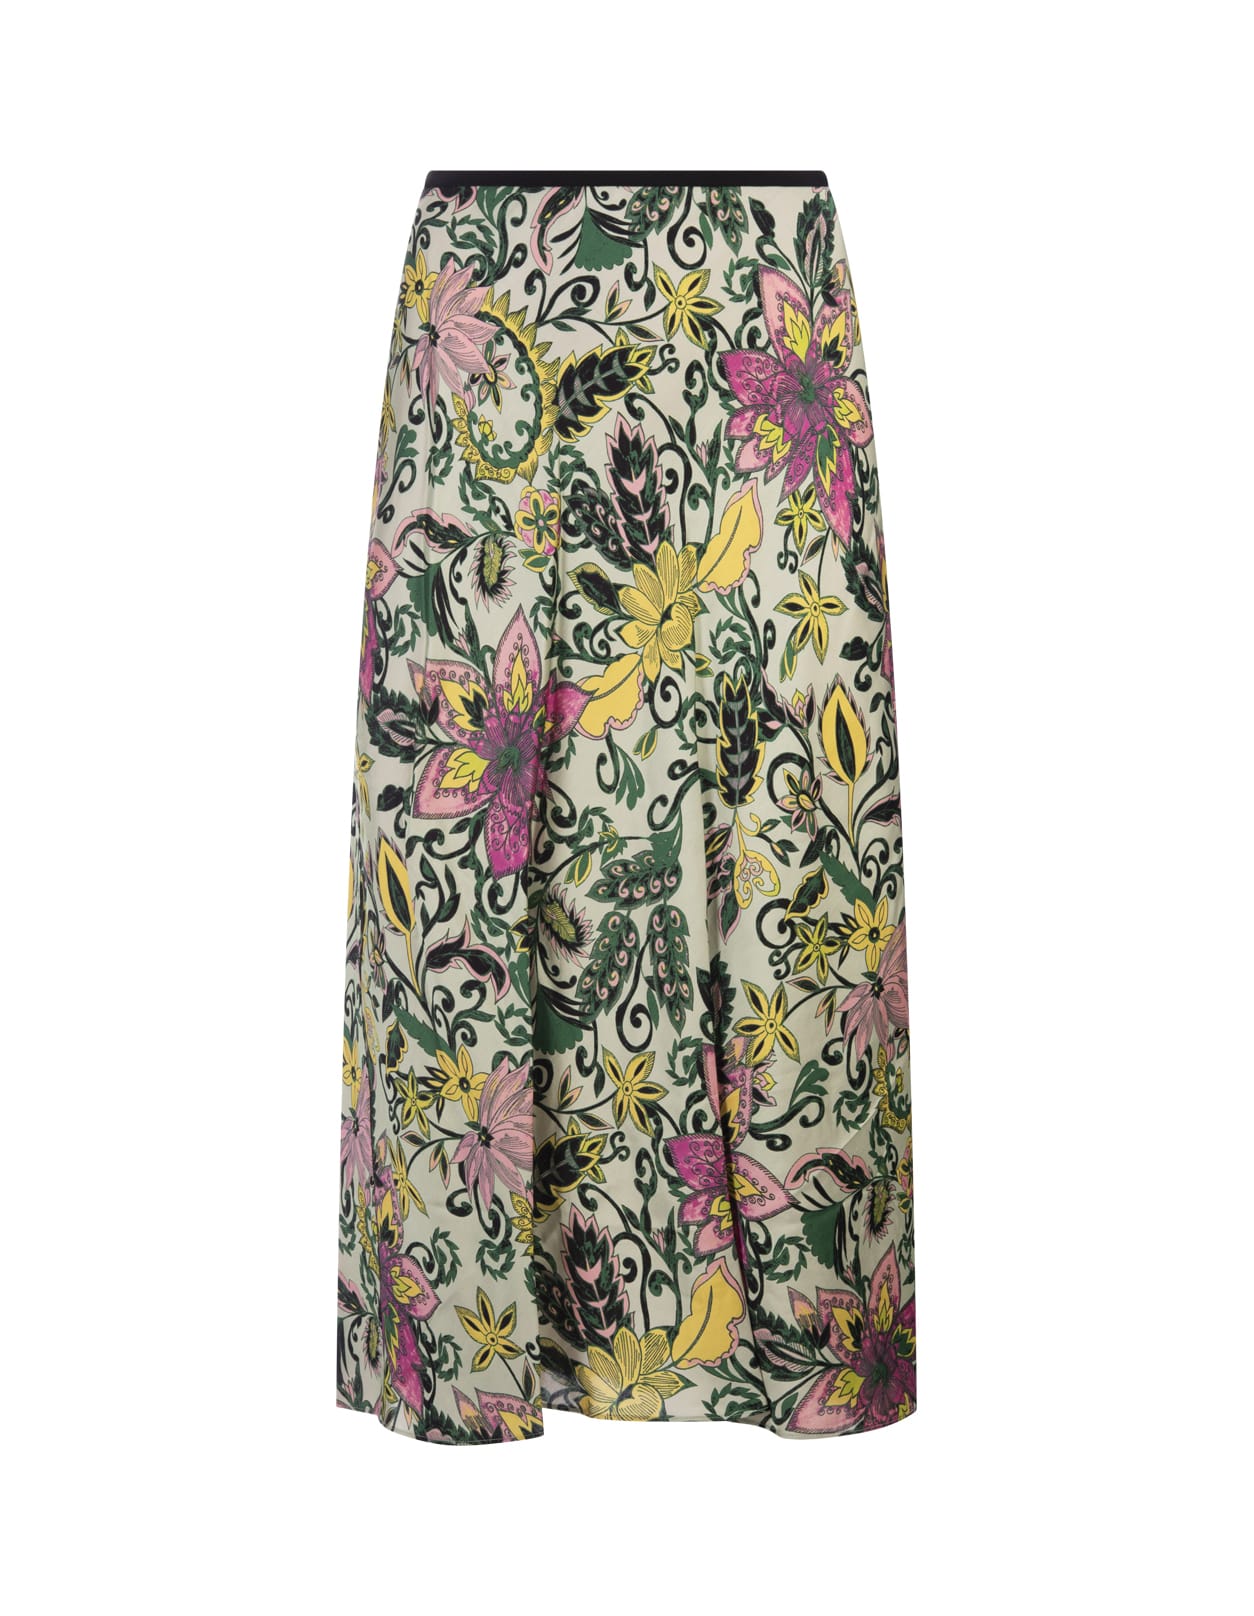 Dina Reversible Skirt In Garden Paisley Mint Green And Pink